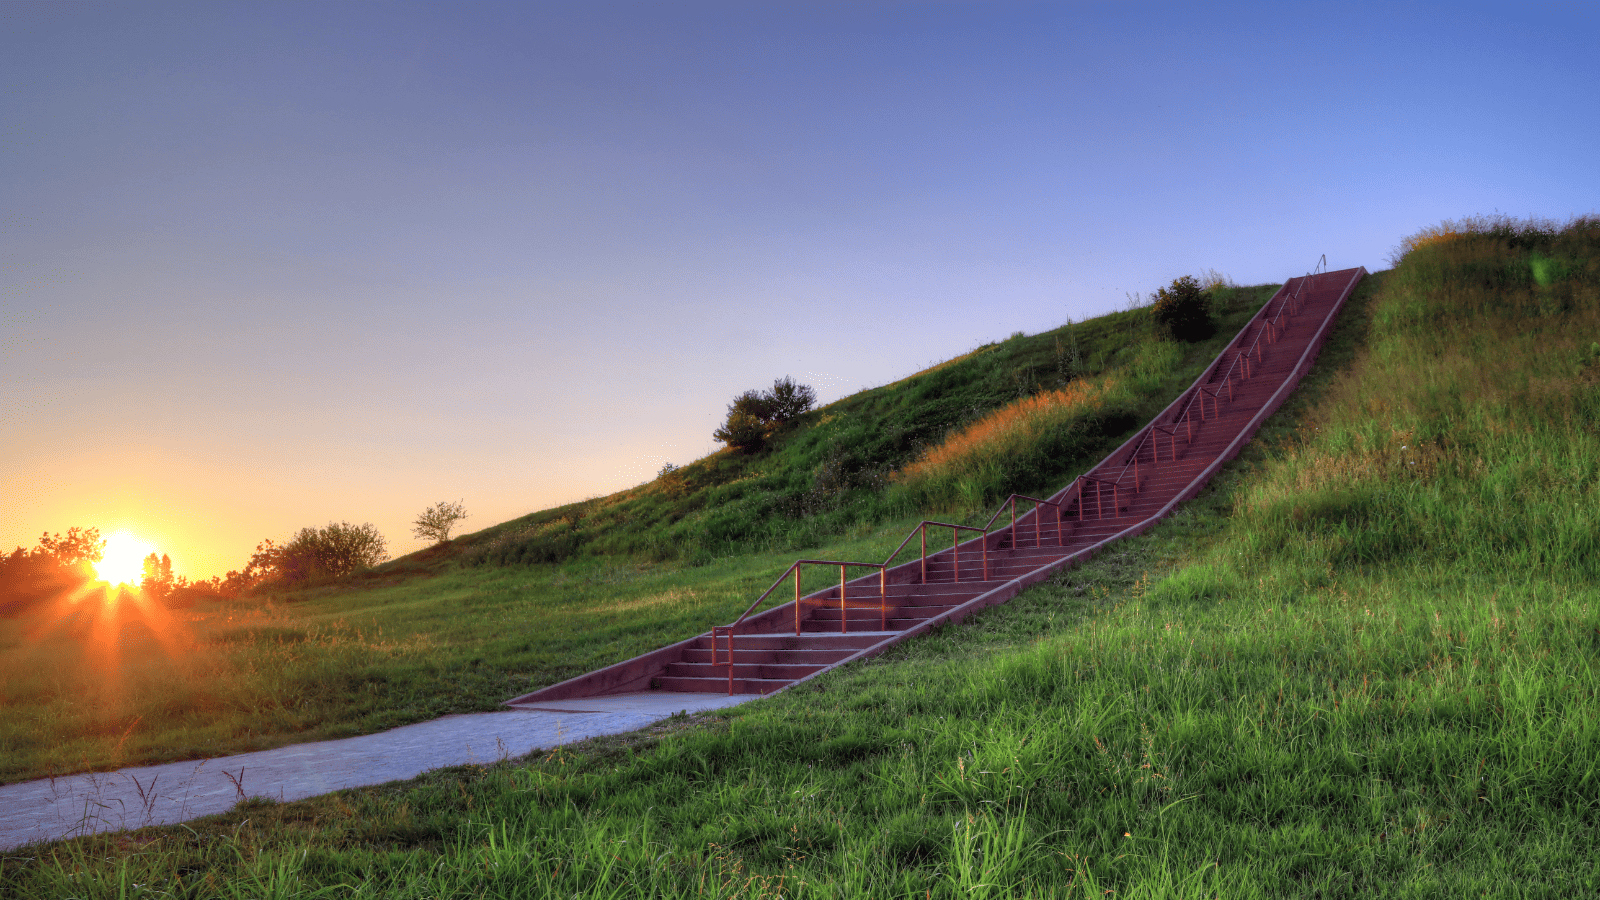 Cahokia Mounds State Historic Site